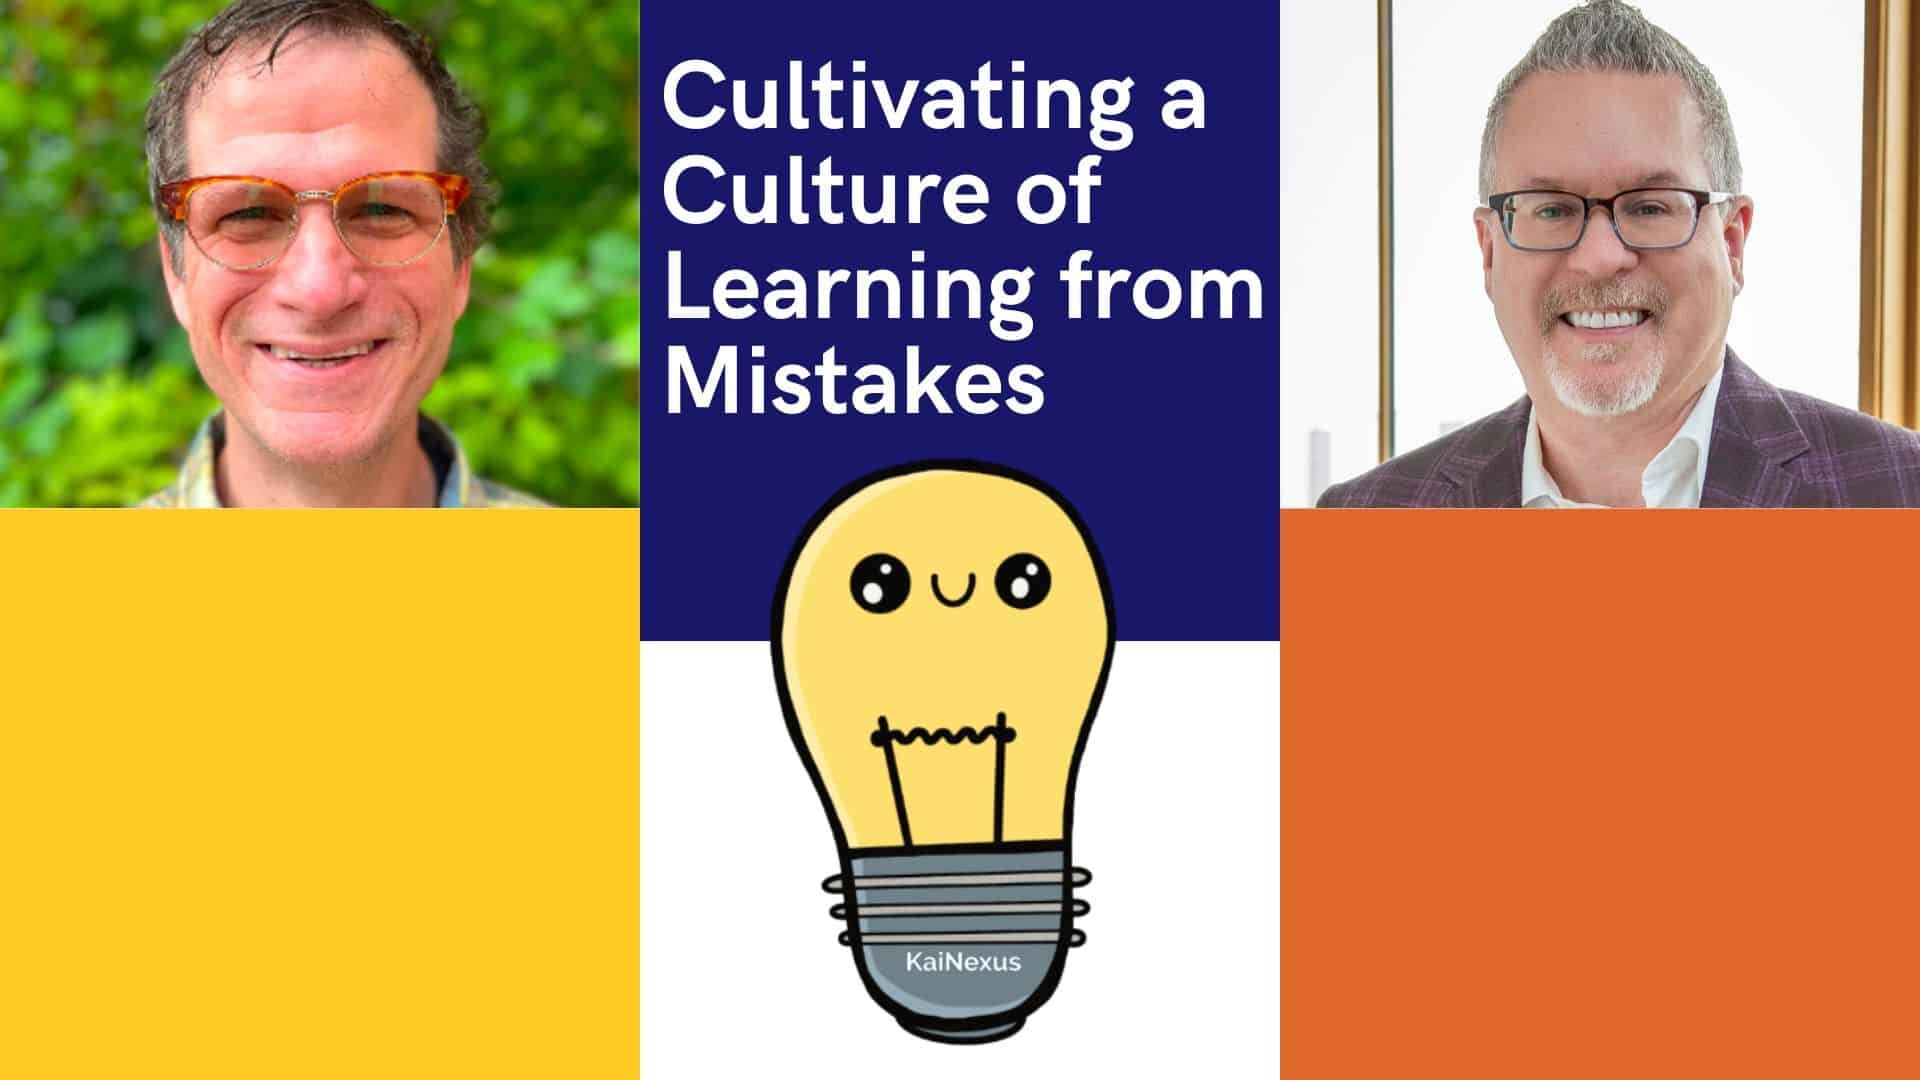 Upcoming Panel Discussion: Cultivating a Culture of Learning from Mistakes at KaiNexus and Beyond